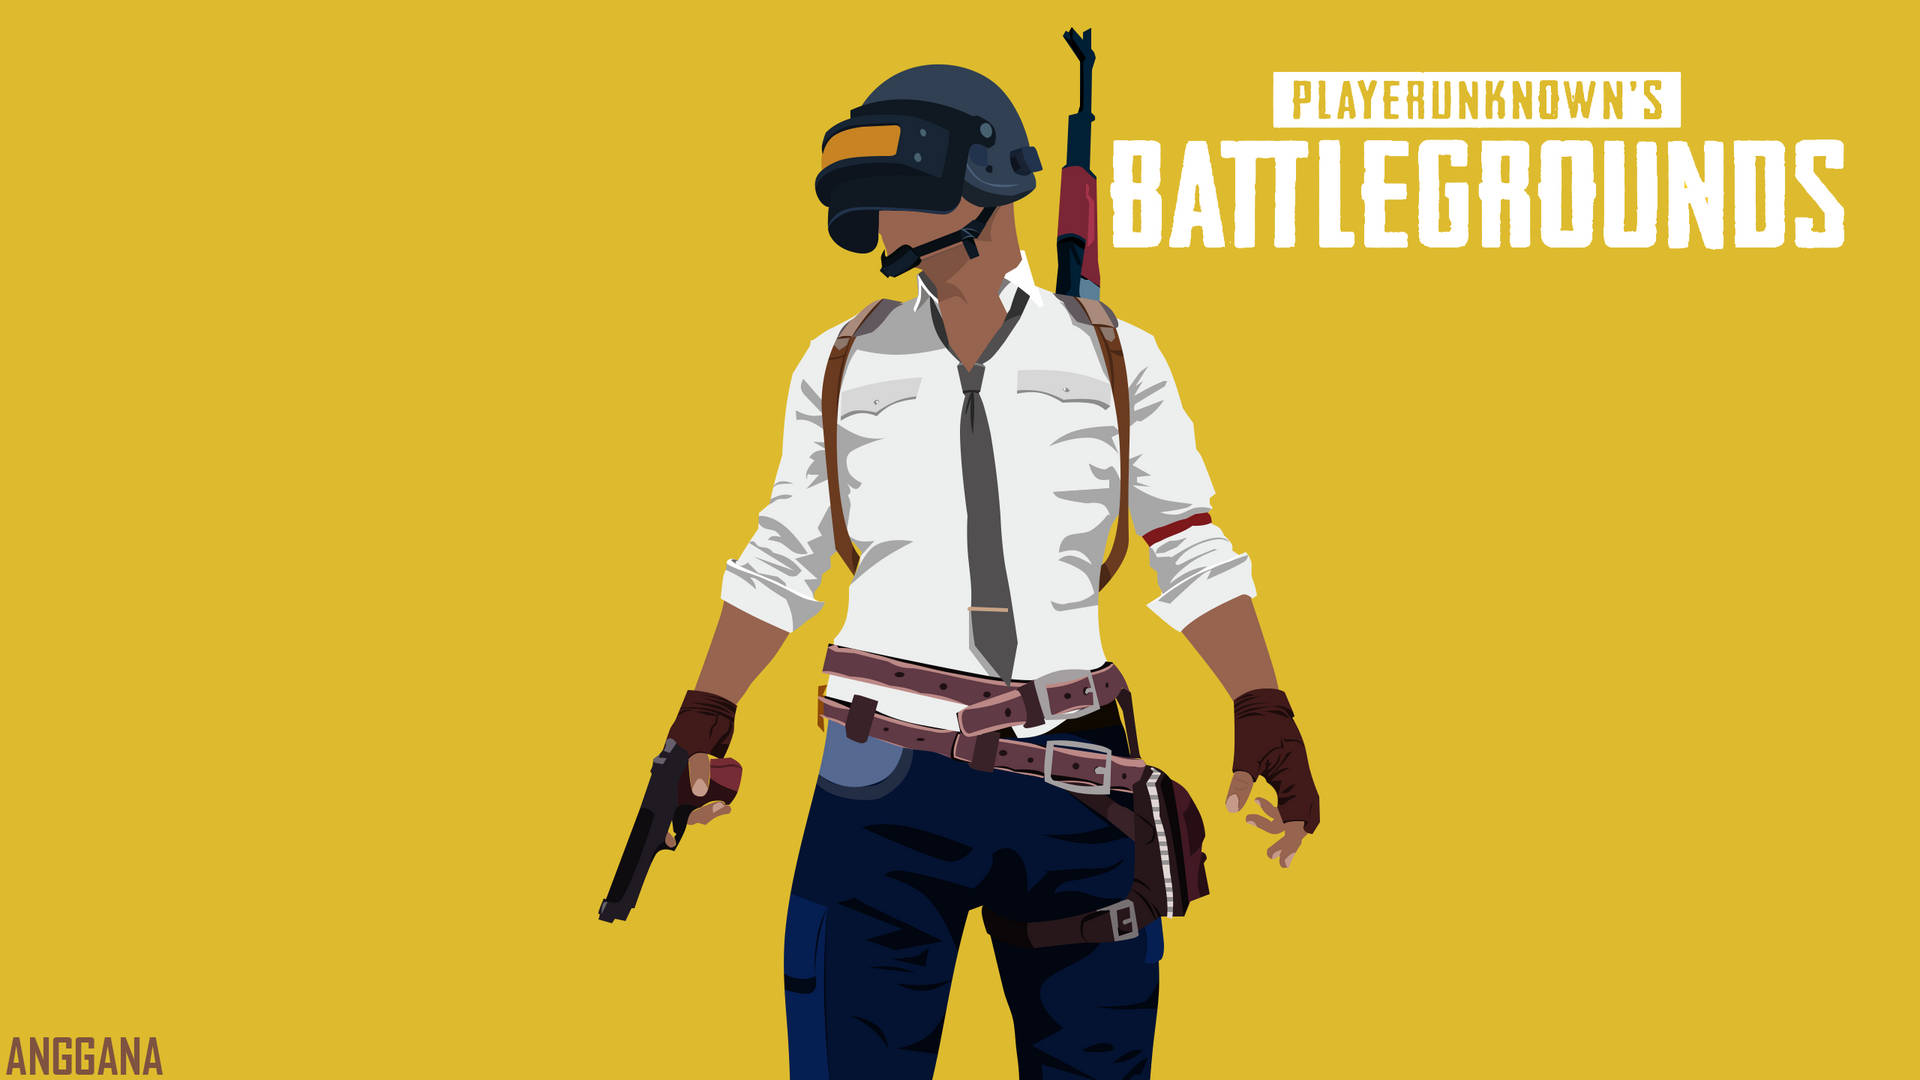 Download Playerunknowns Battlegrounds wallpapers for mobile phone free Playerunknowns  Battlegrounds HD pictures